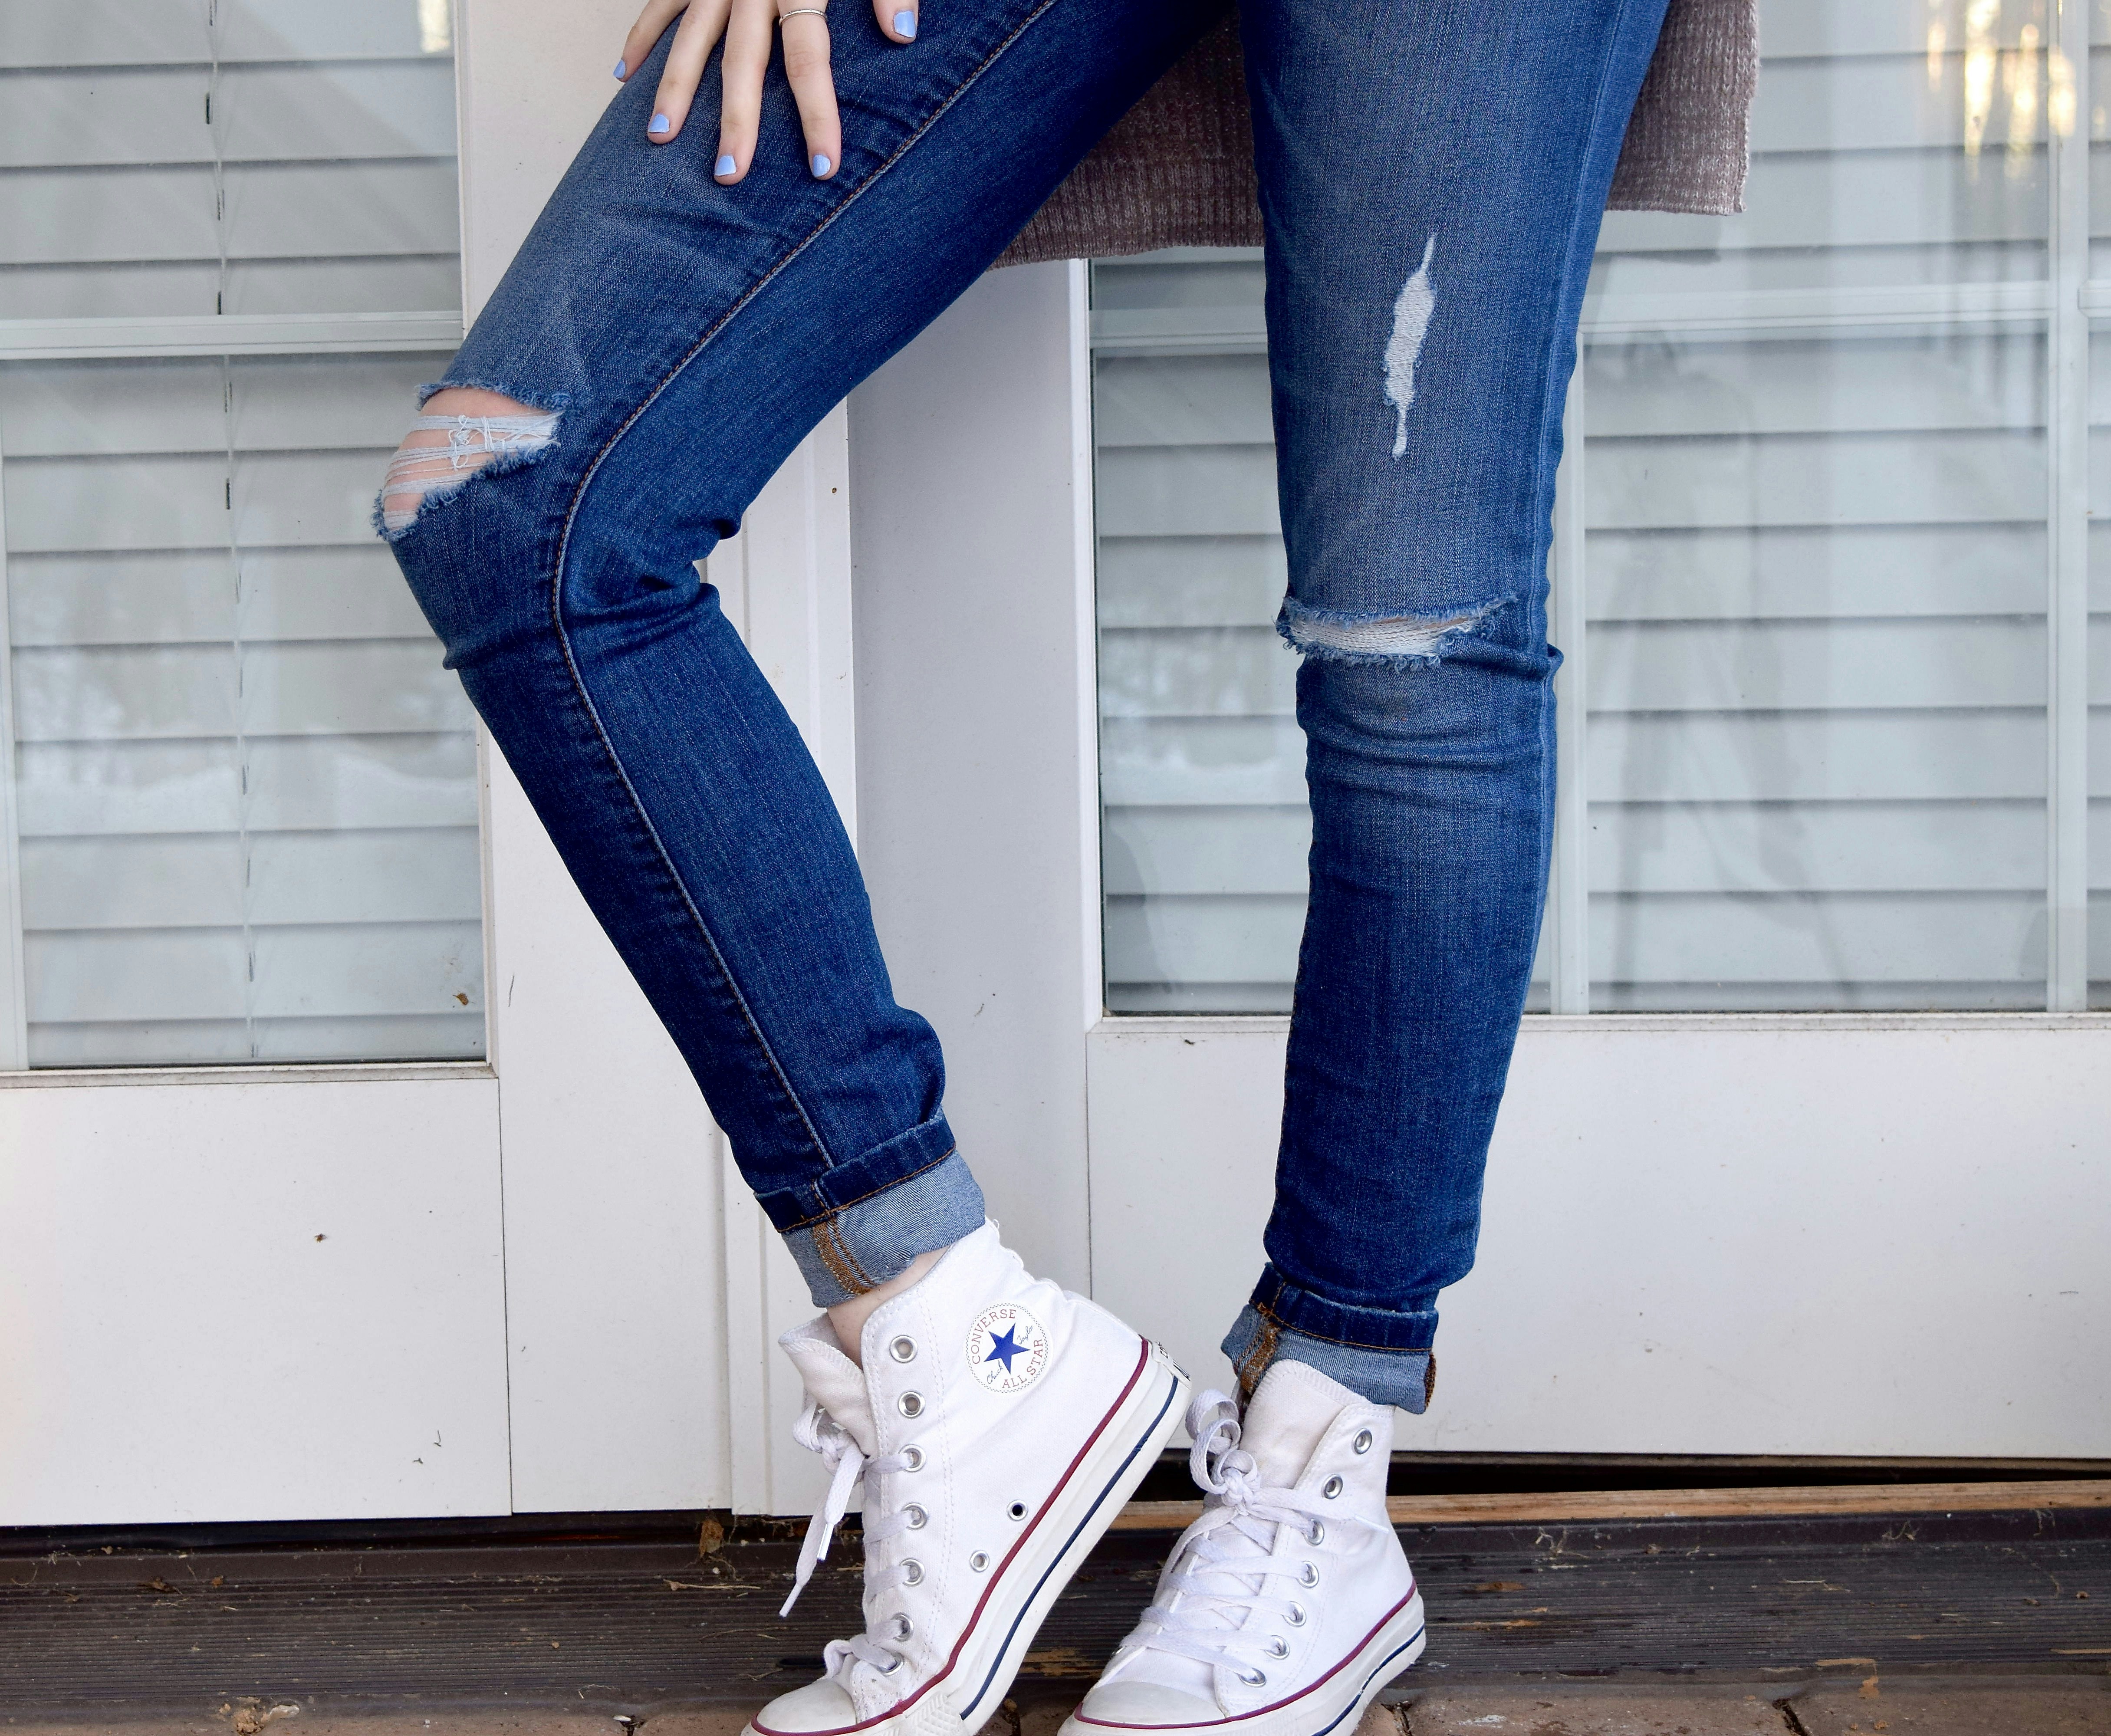 white converse and jeans